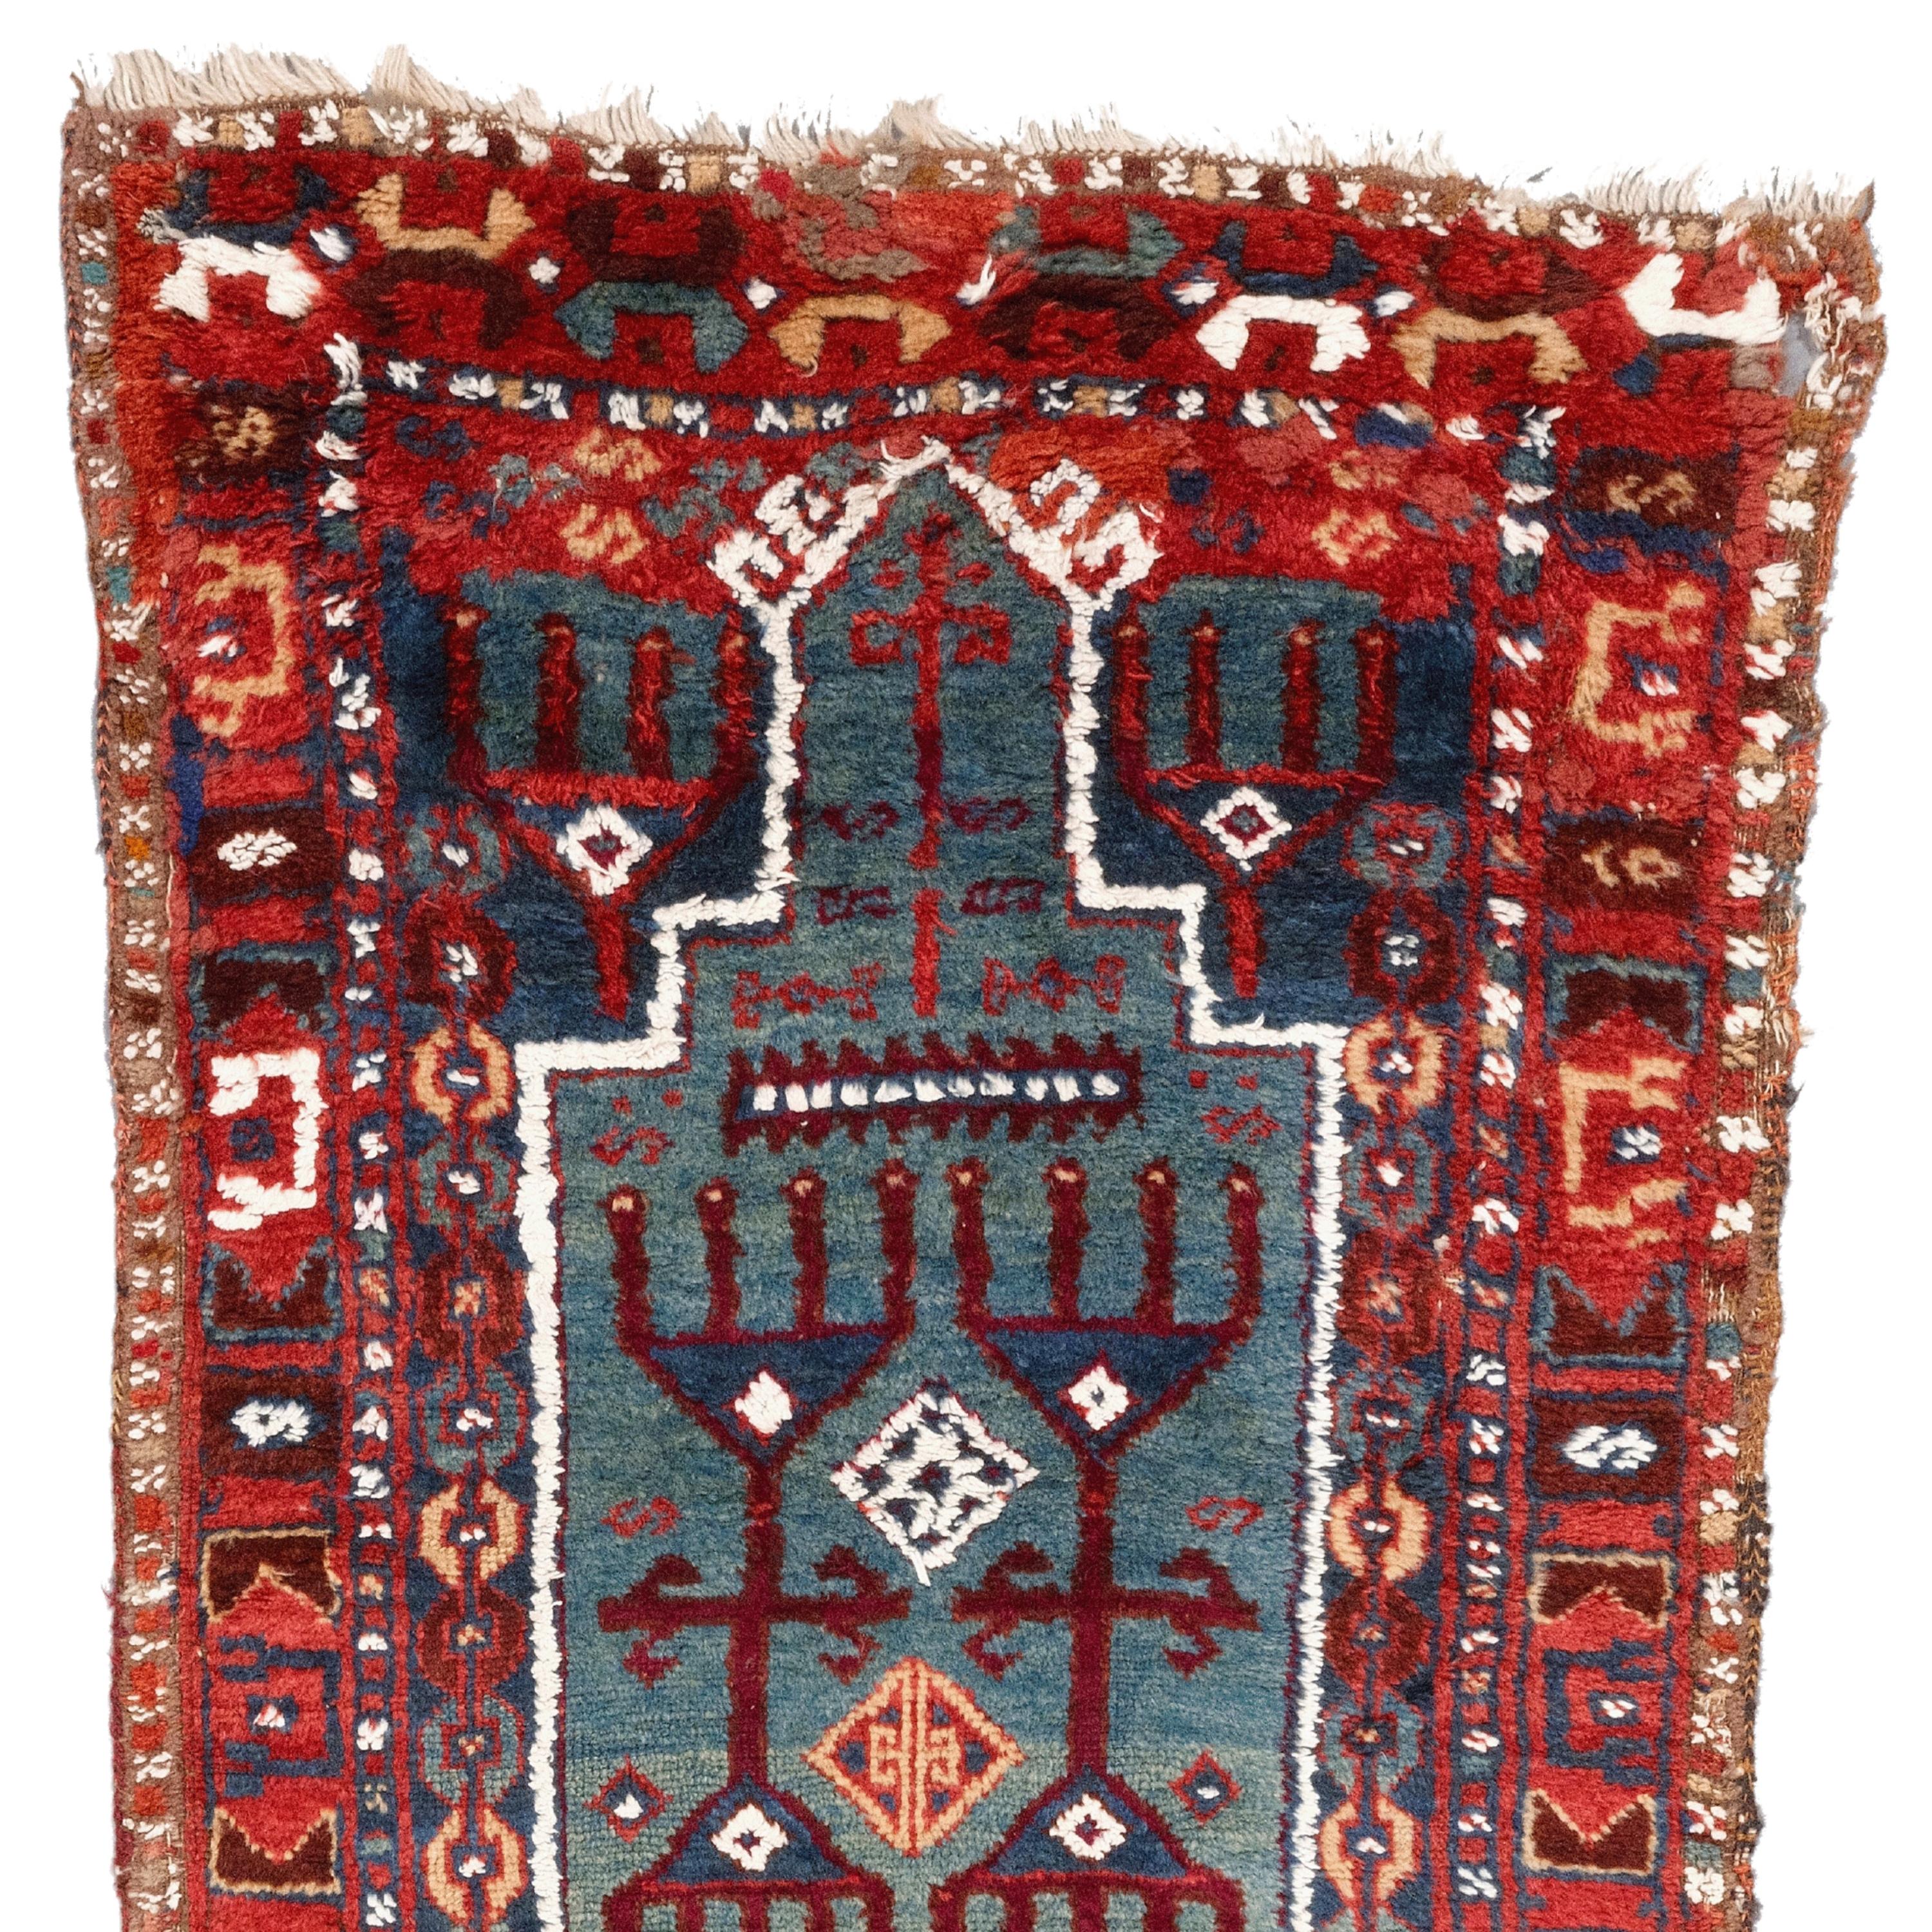 19th Century Anatolian Kurdish Prayer Rug

This extraordinary carpet will fascinate you with its intricate designs and vibrant colors that reflect the rich history and craftsmanship of the period. Each stitch tells the story of skilled craftsmen who